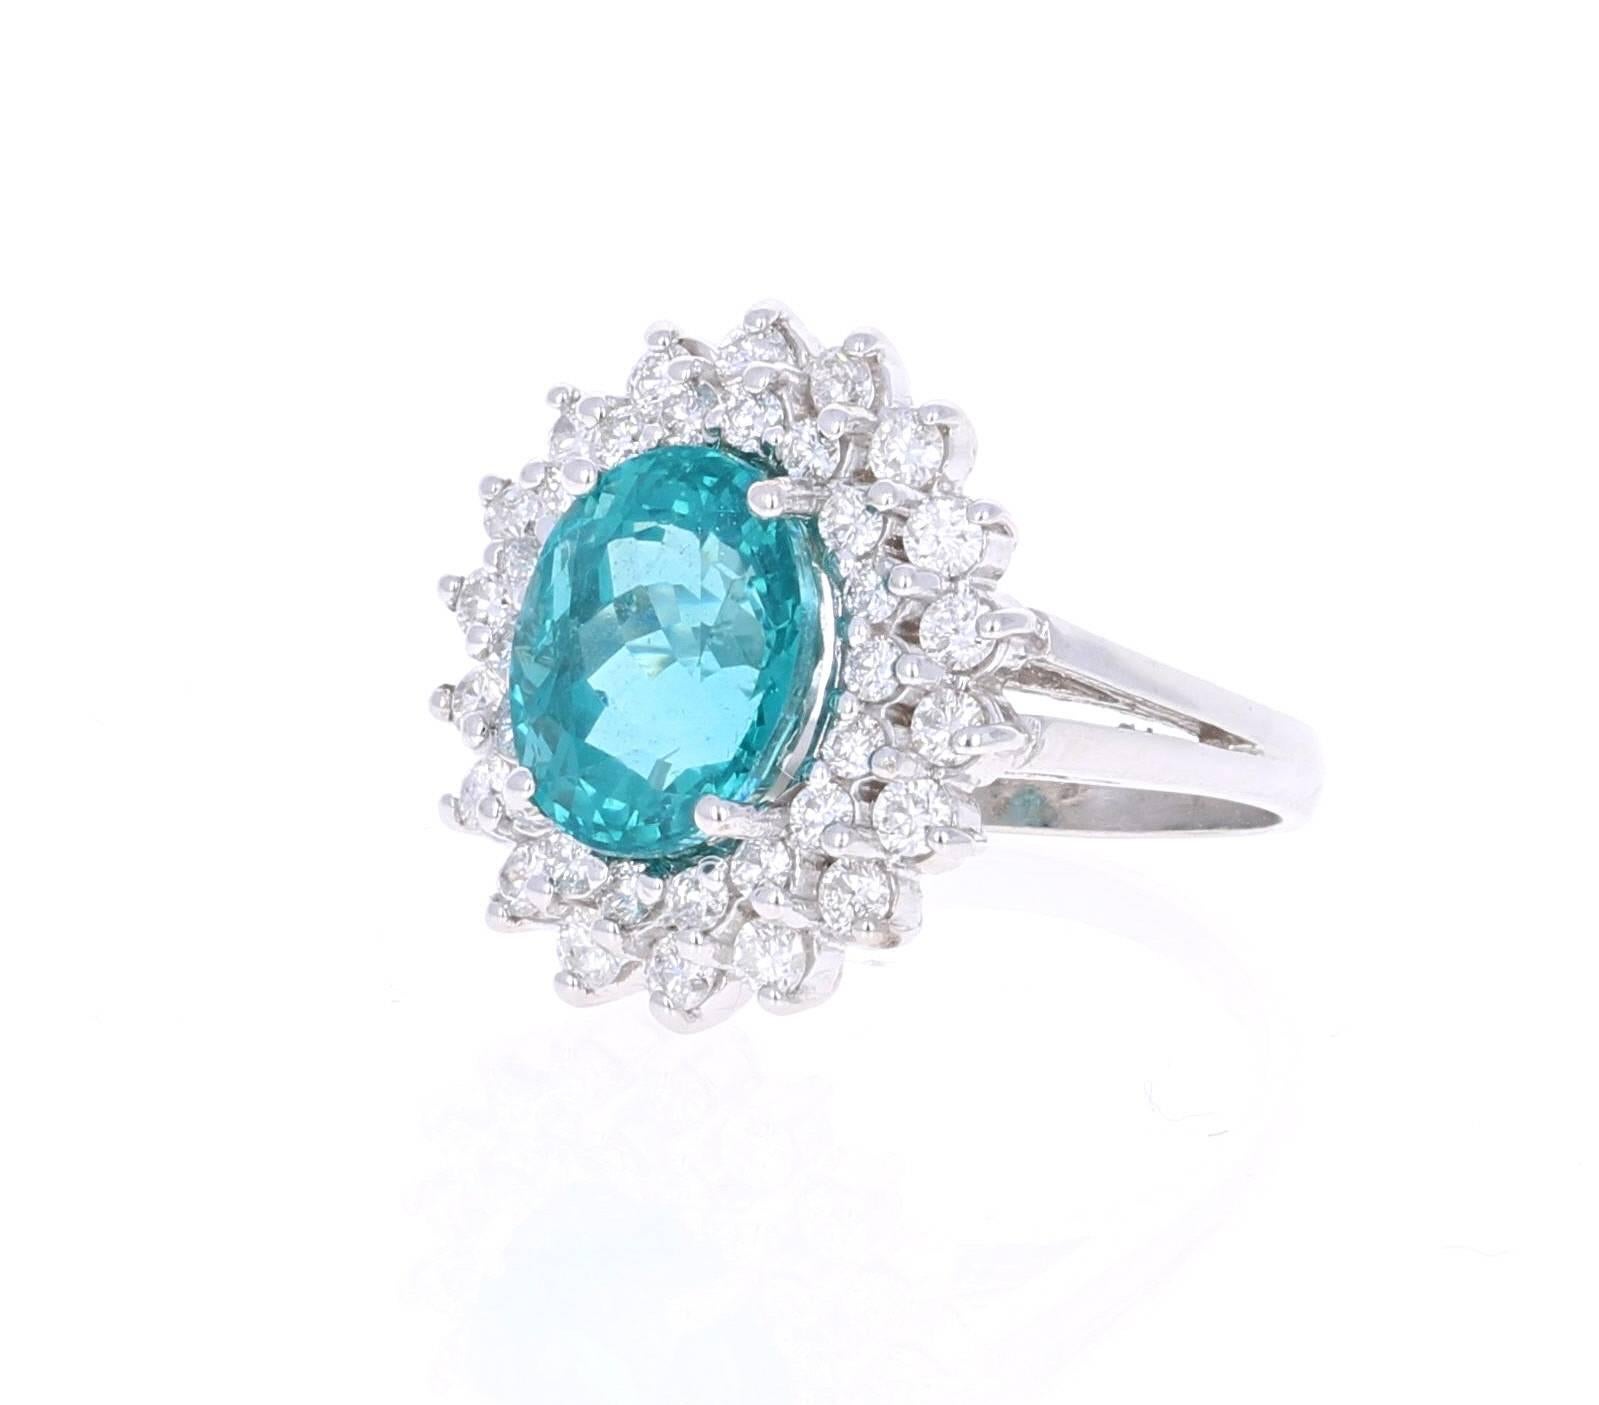 This stunning Apatite and Diamond Ring can easily transform into a unique and classy engagement ring for your special someone!  The ring has a 5.39 Carat Oval Cut Apatite set in the center of the ring surrounded by 36 Round Cut Diamonds that weigh